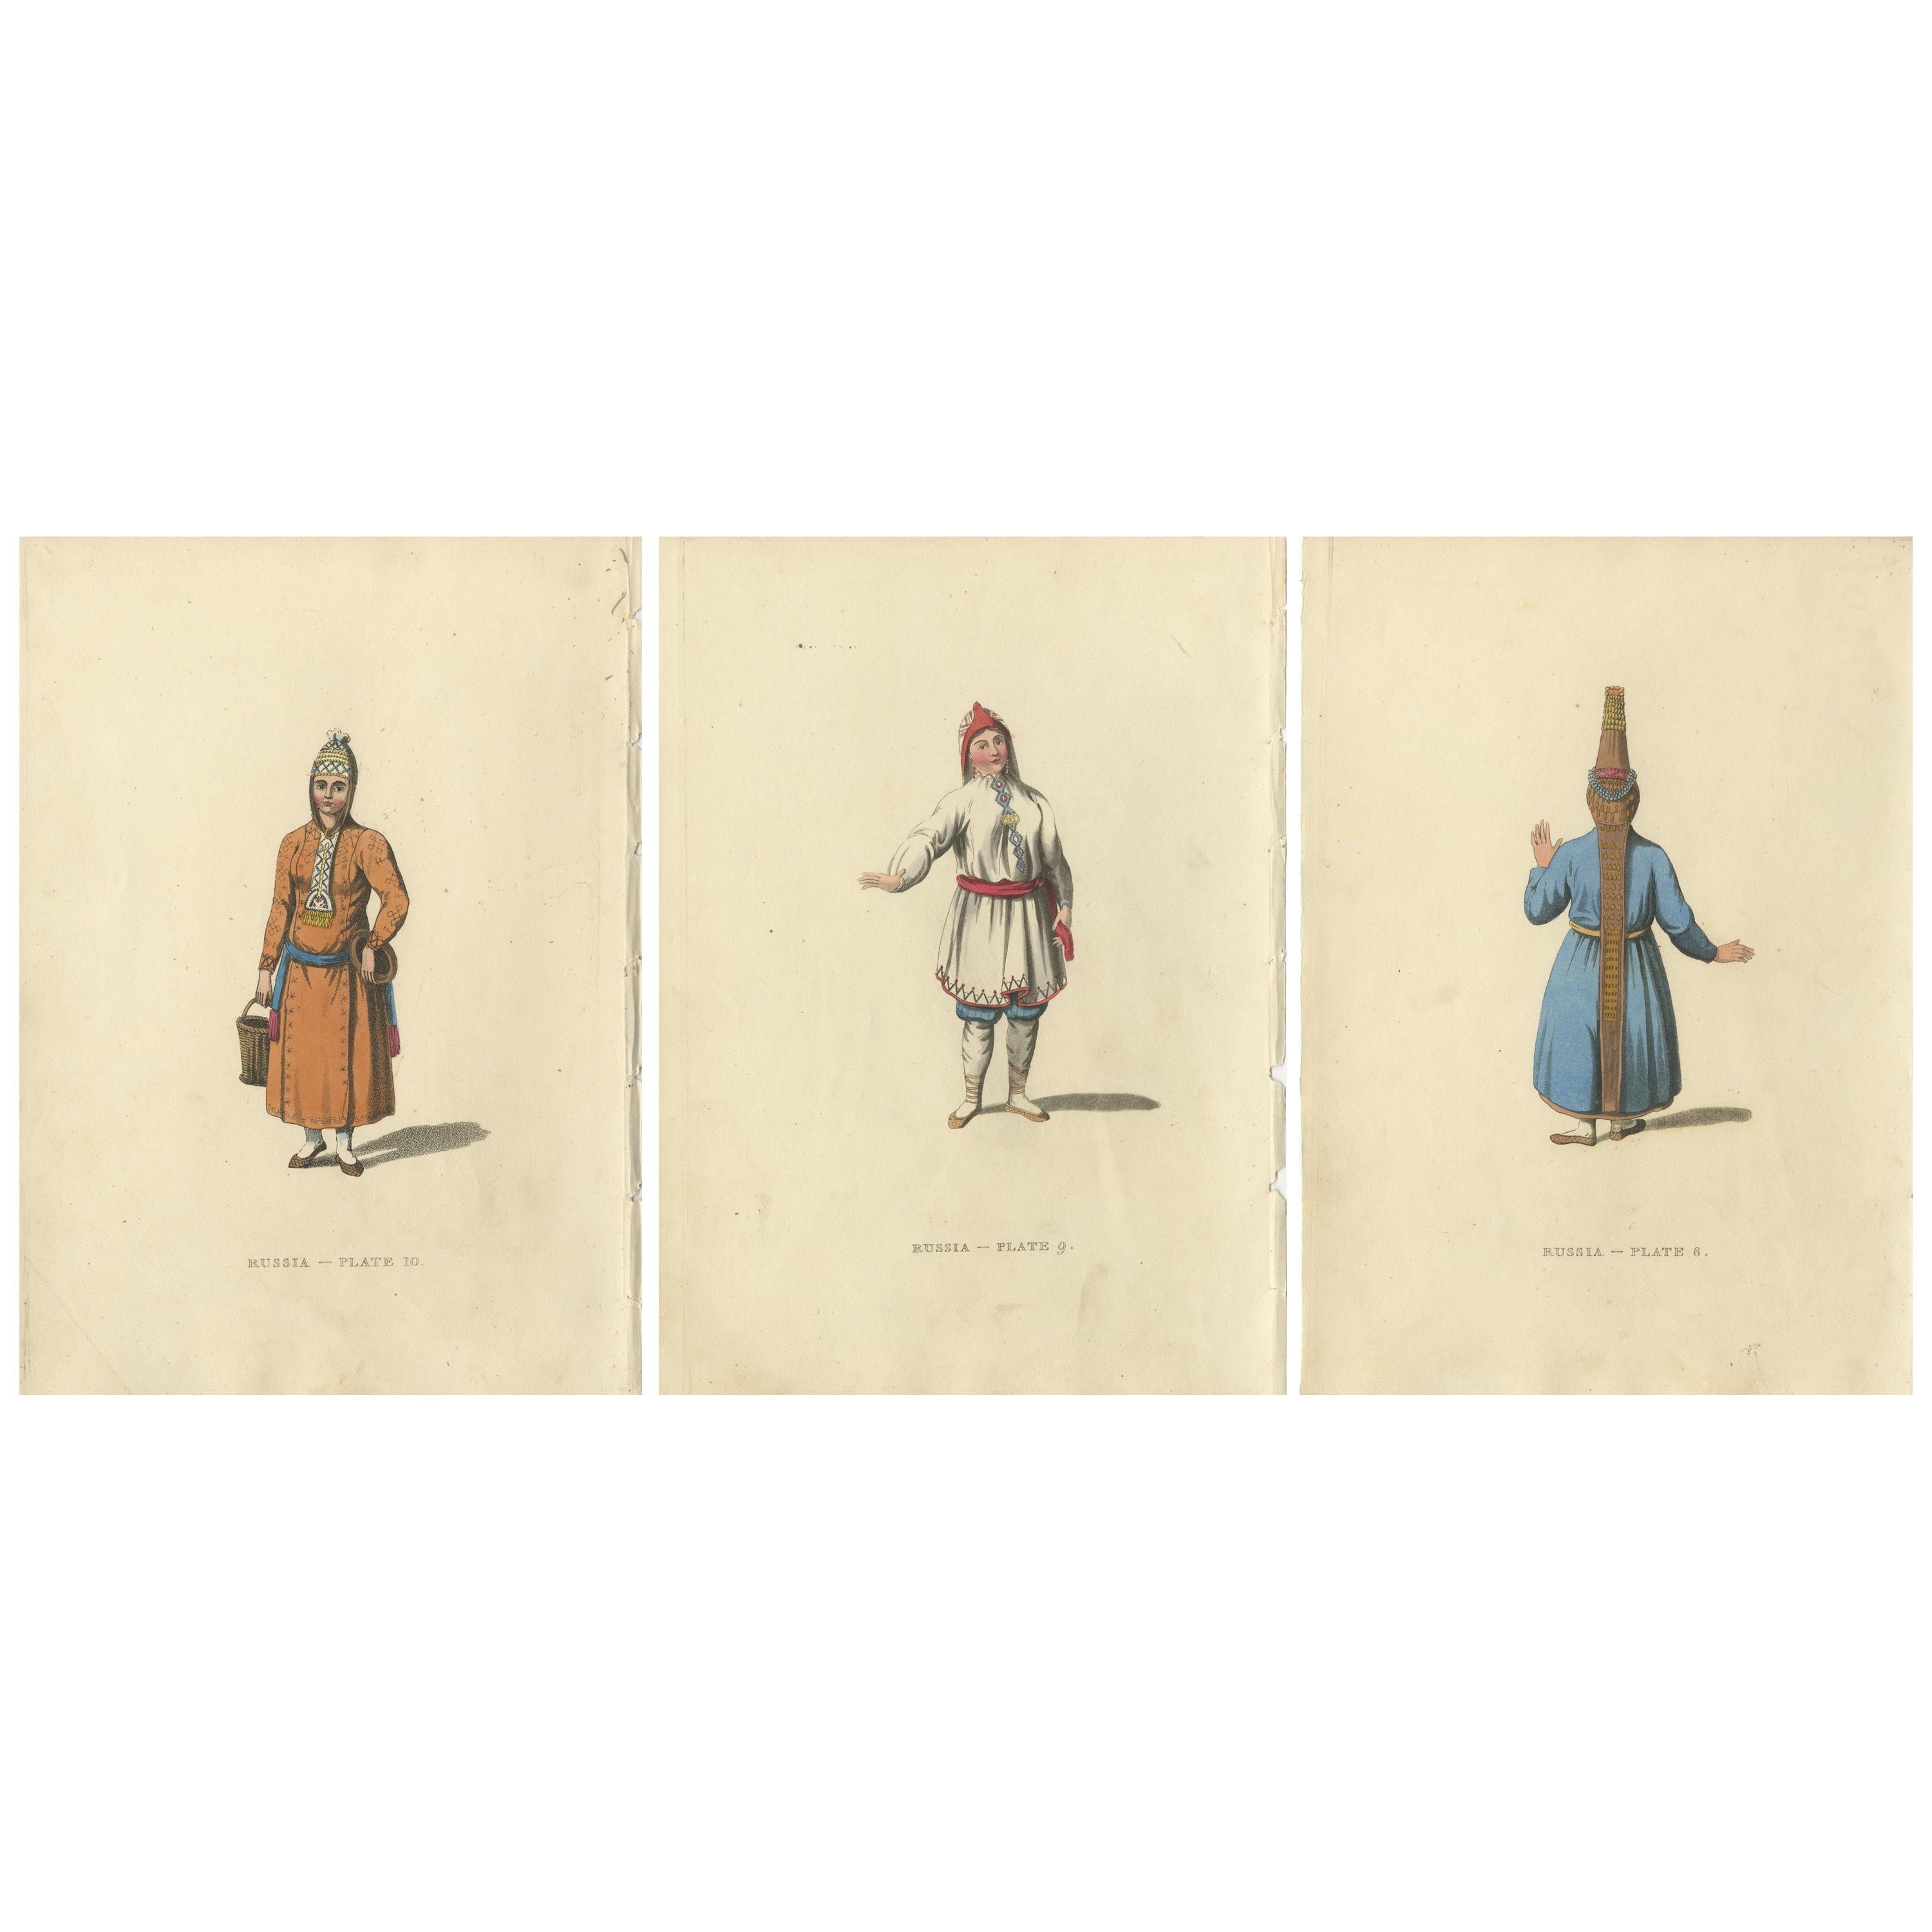 A Visual Journey through 19th-Century Russian Ethnic Attire, Engraved in 1814